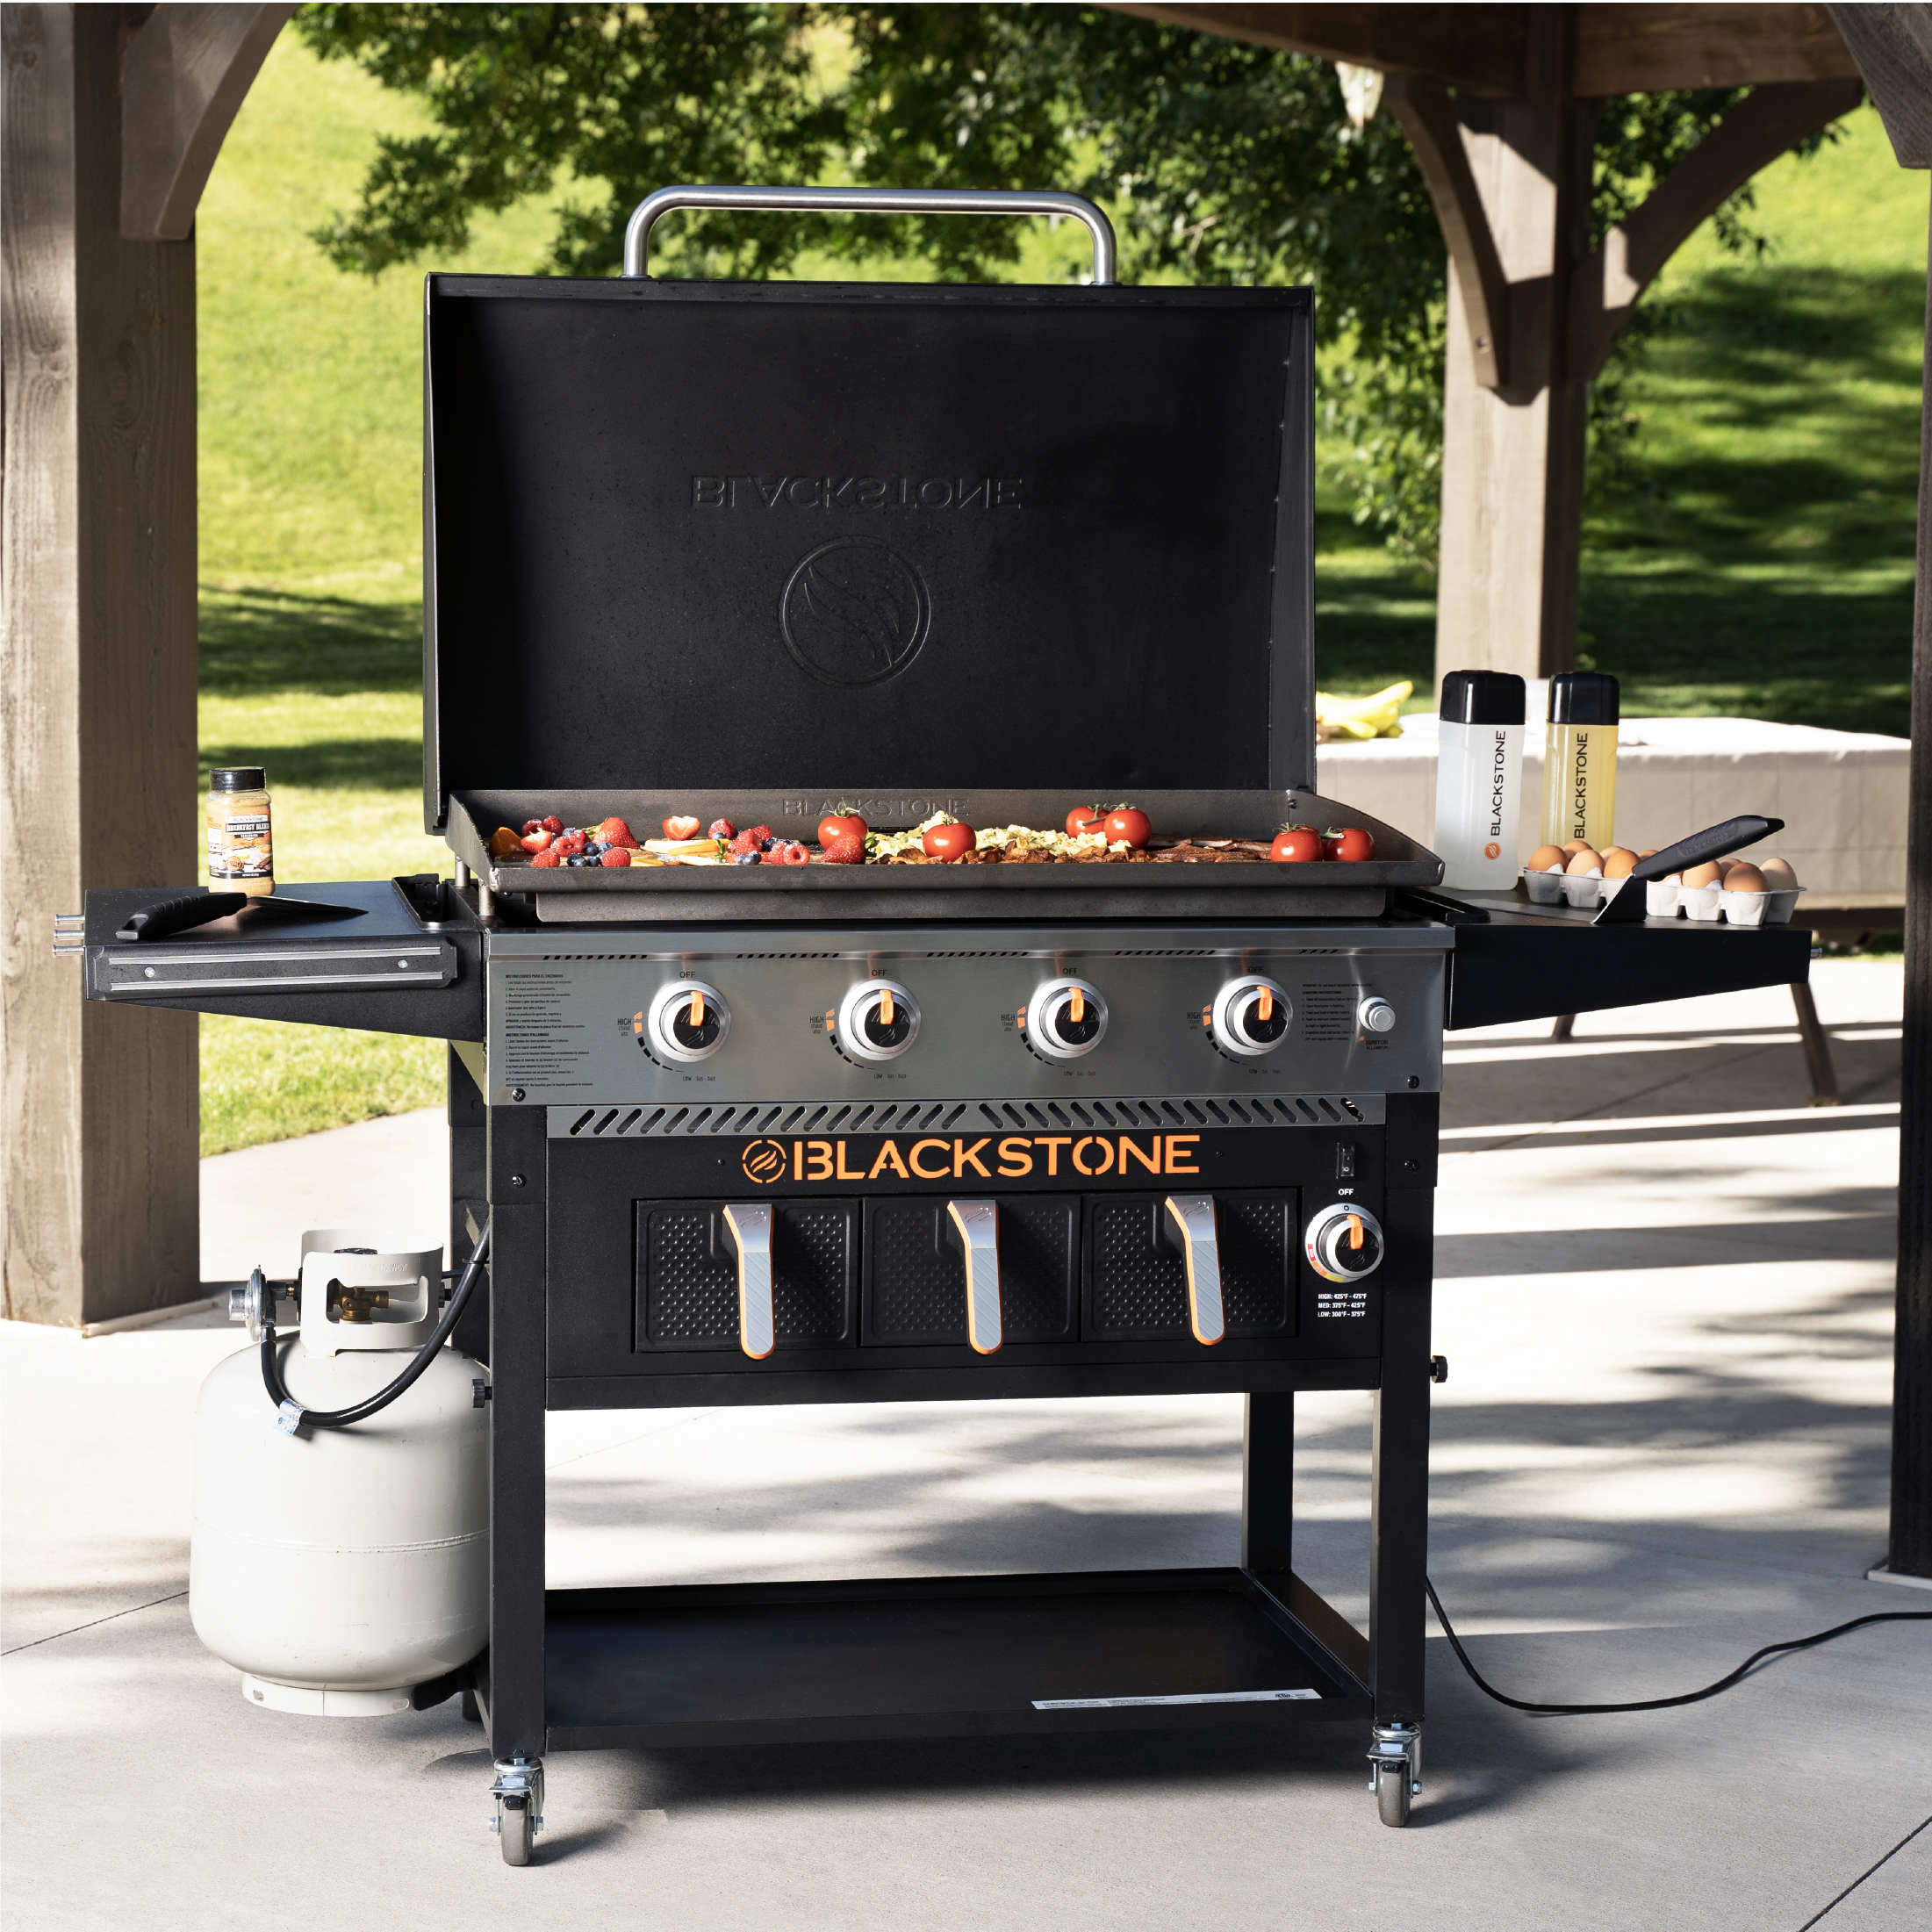 Blackstone 4-Burner 36" Propane Griddle with Air Fryer and Hood - image 4 of 23